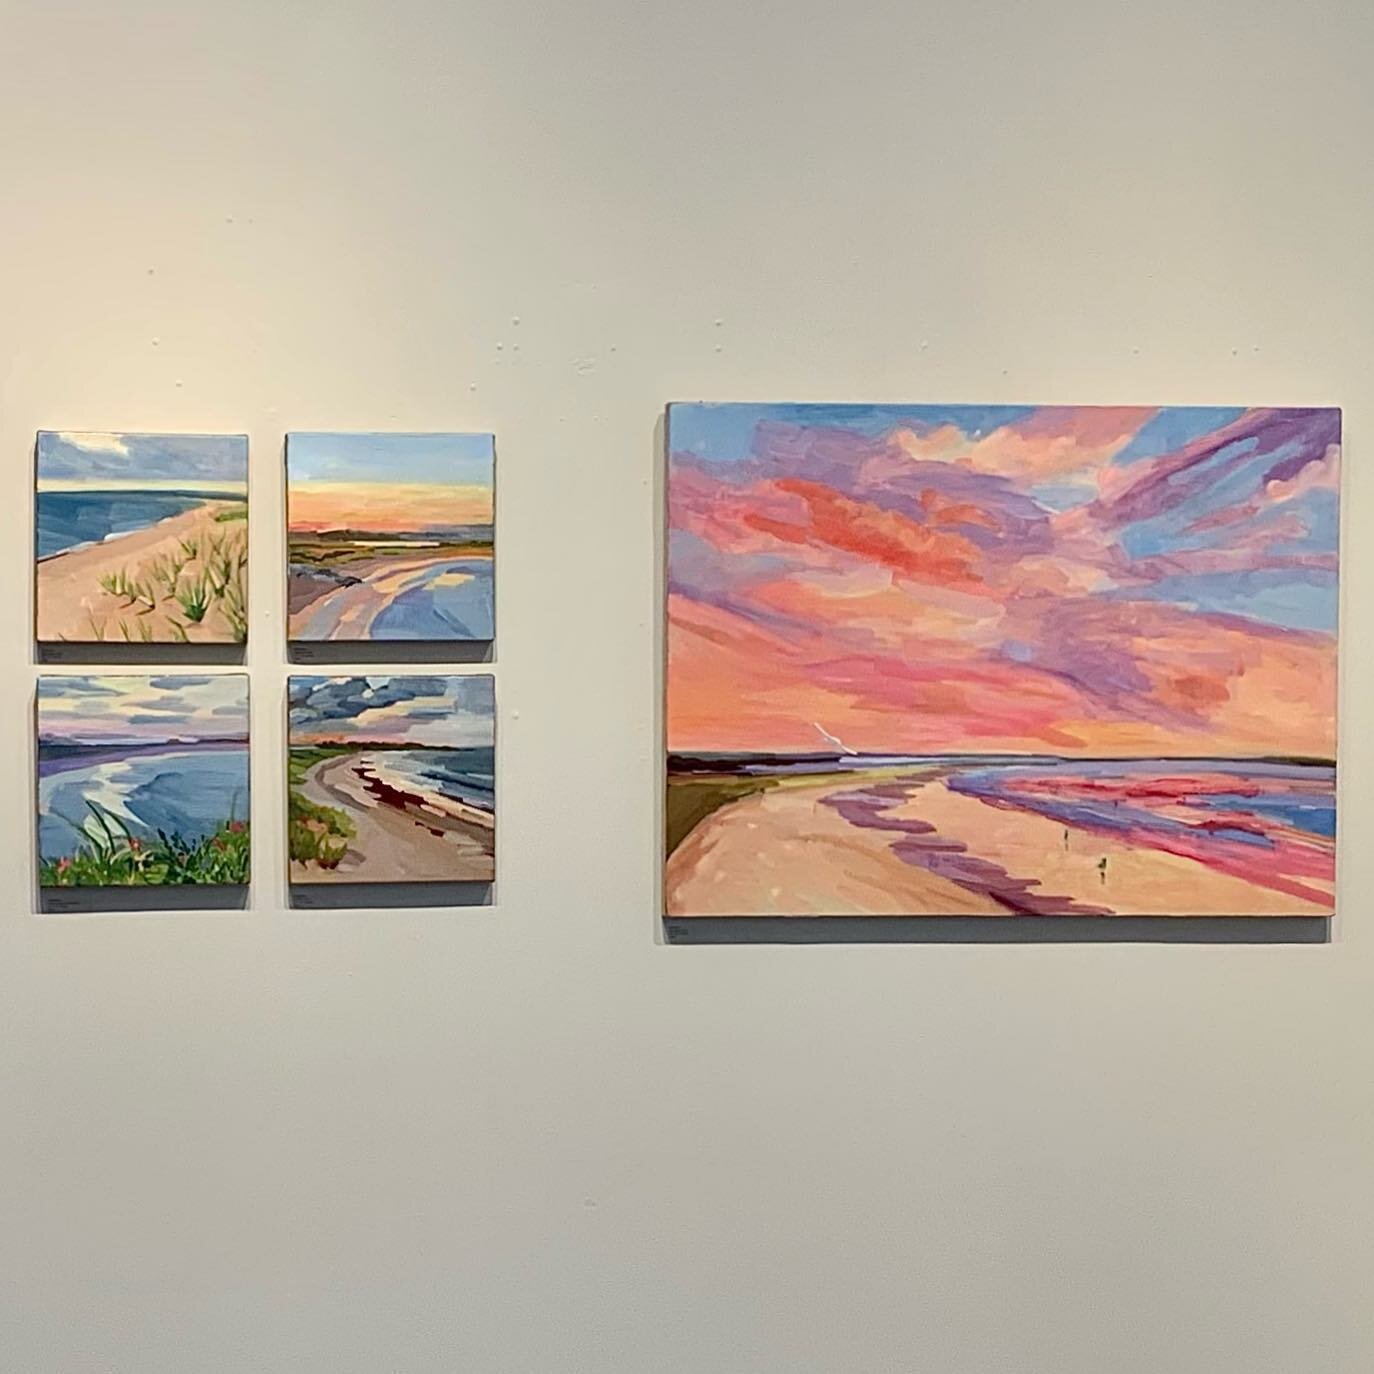 PLACES WE LOVE featuring paintings by Jill Madden &amp; Rob Diebboll on display through Sept 5th! The paintings posted here are all by Jill Madden and all are painted in Newport! The squares are 12&rdquo; x 12&rdquo; oil/ linen (note: top right 12&rd